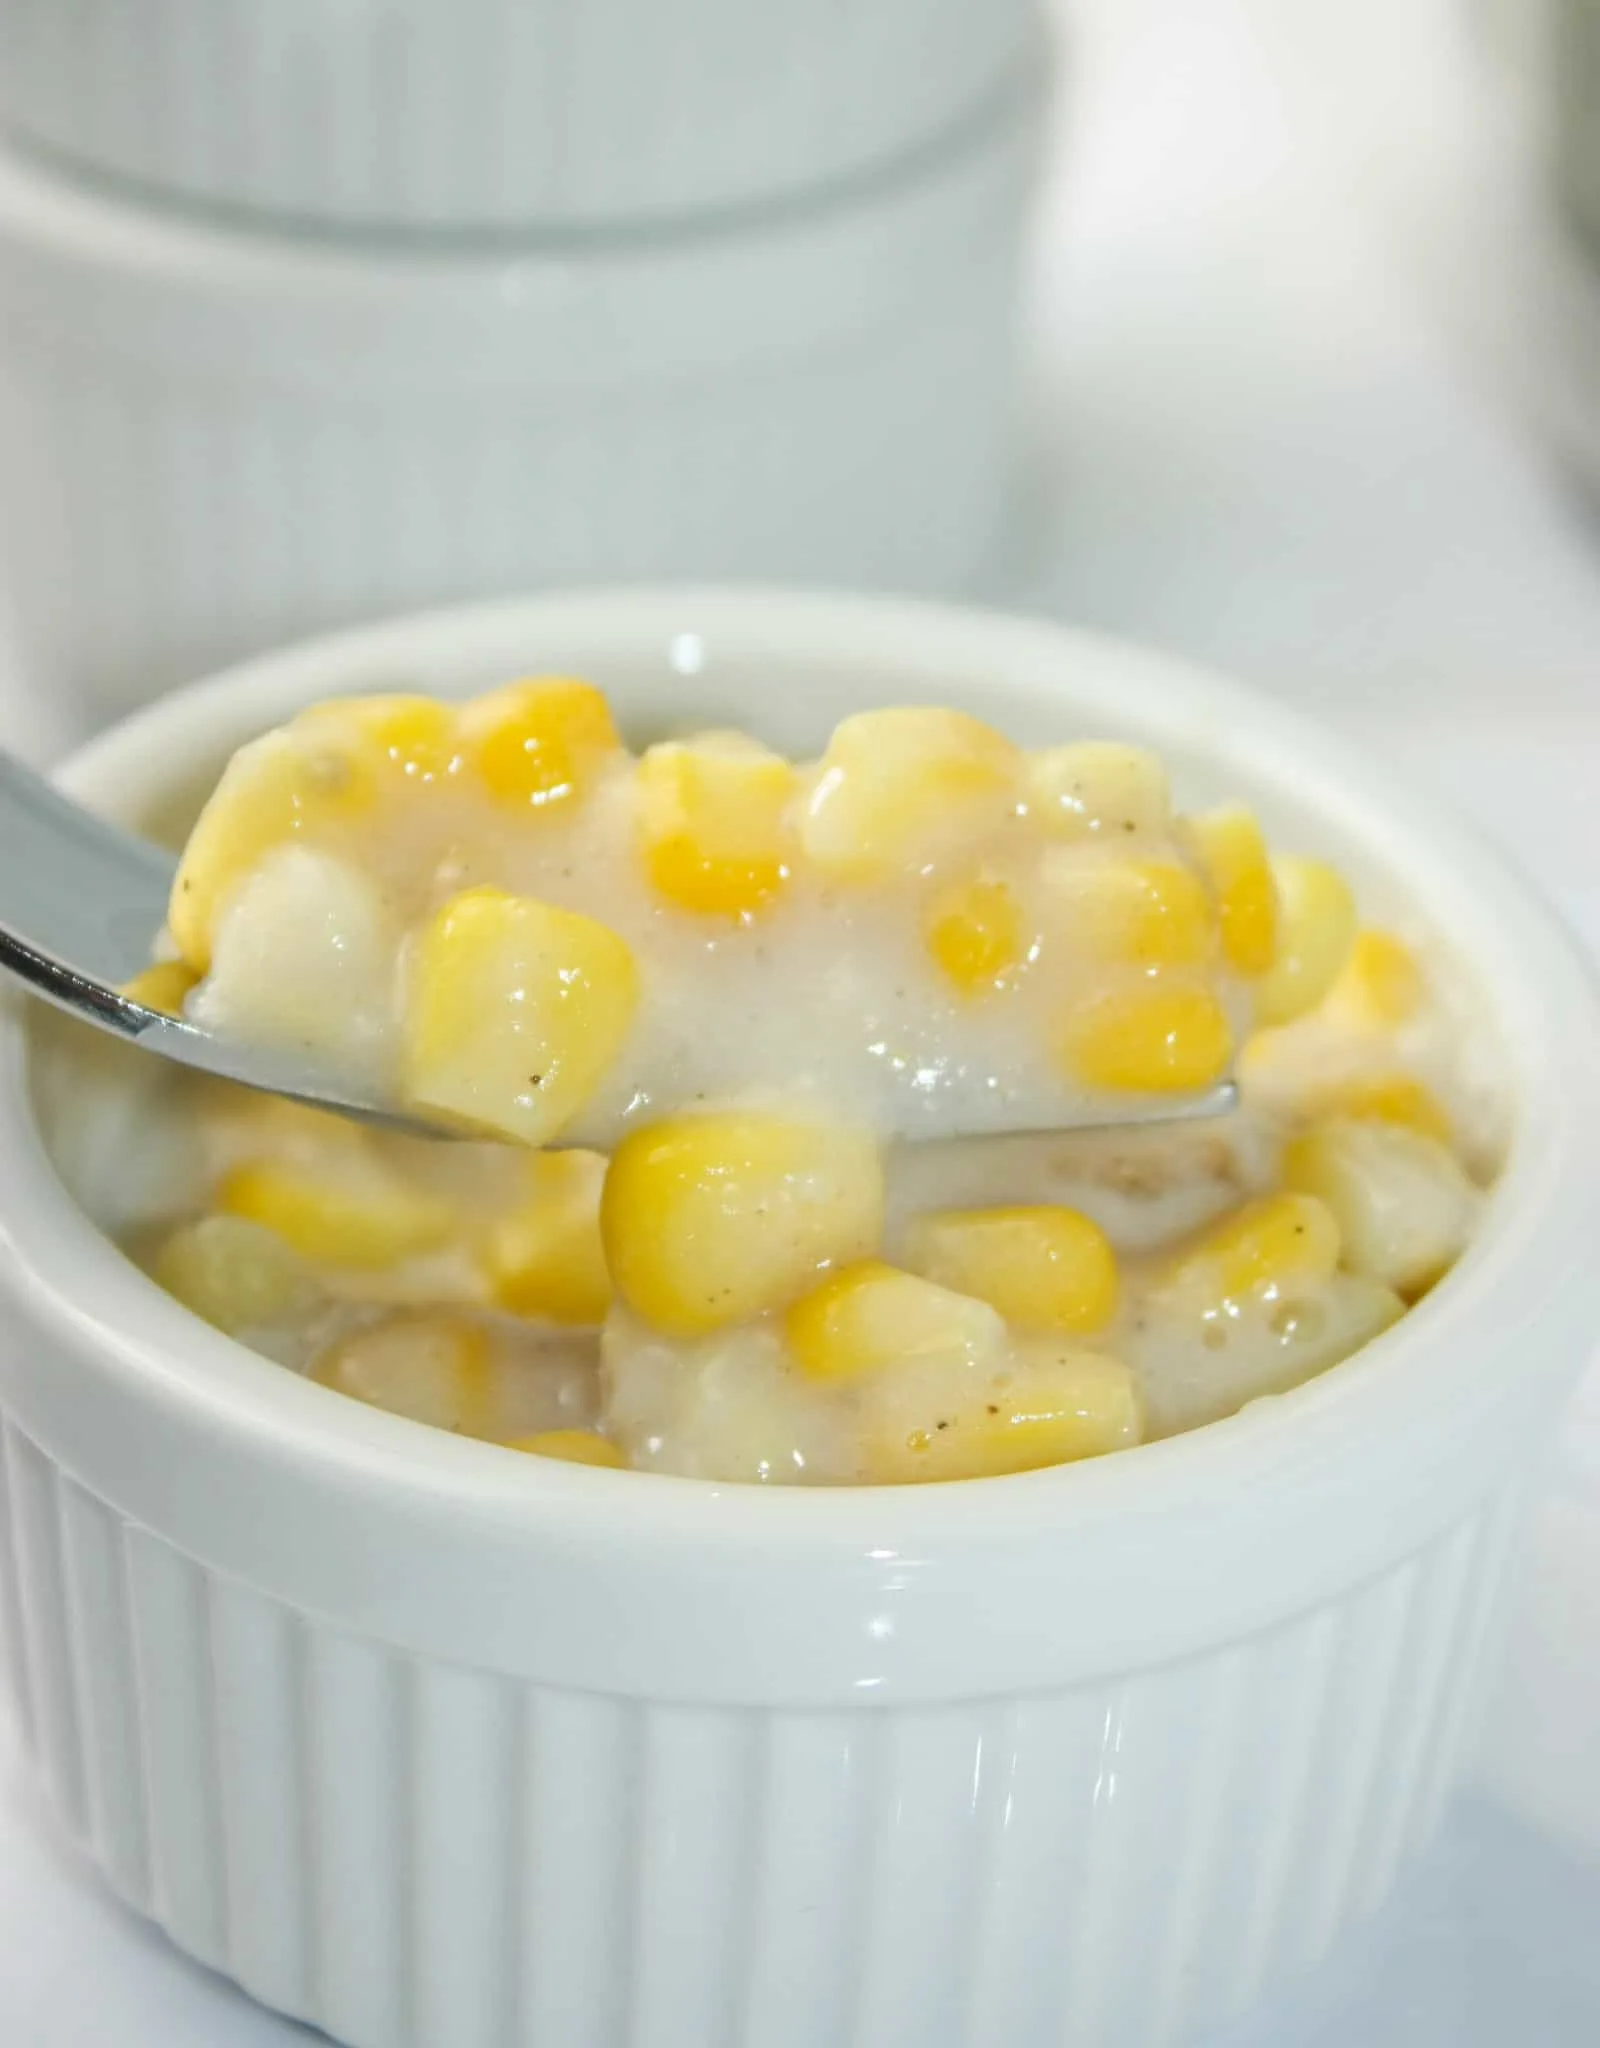 Gluten Free Creamed Corn is a quick side dish that can easily be whipped up on a busy week night.  This dairy free version uses gluten free flour as a thickener.